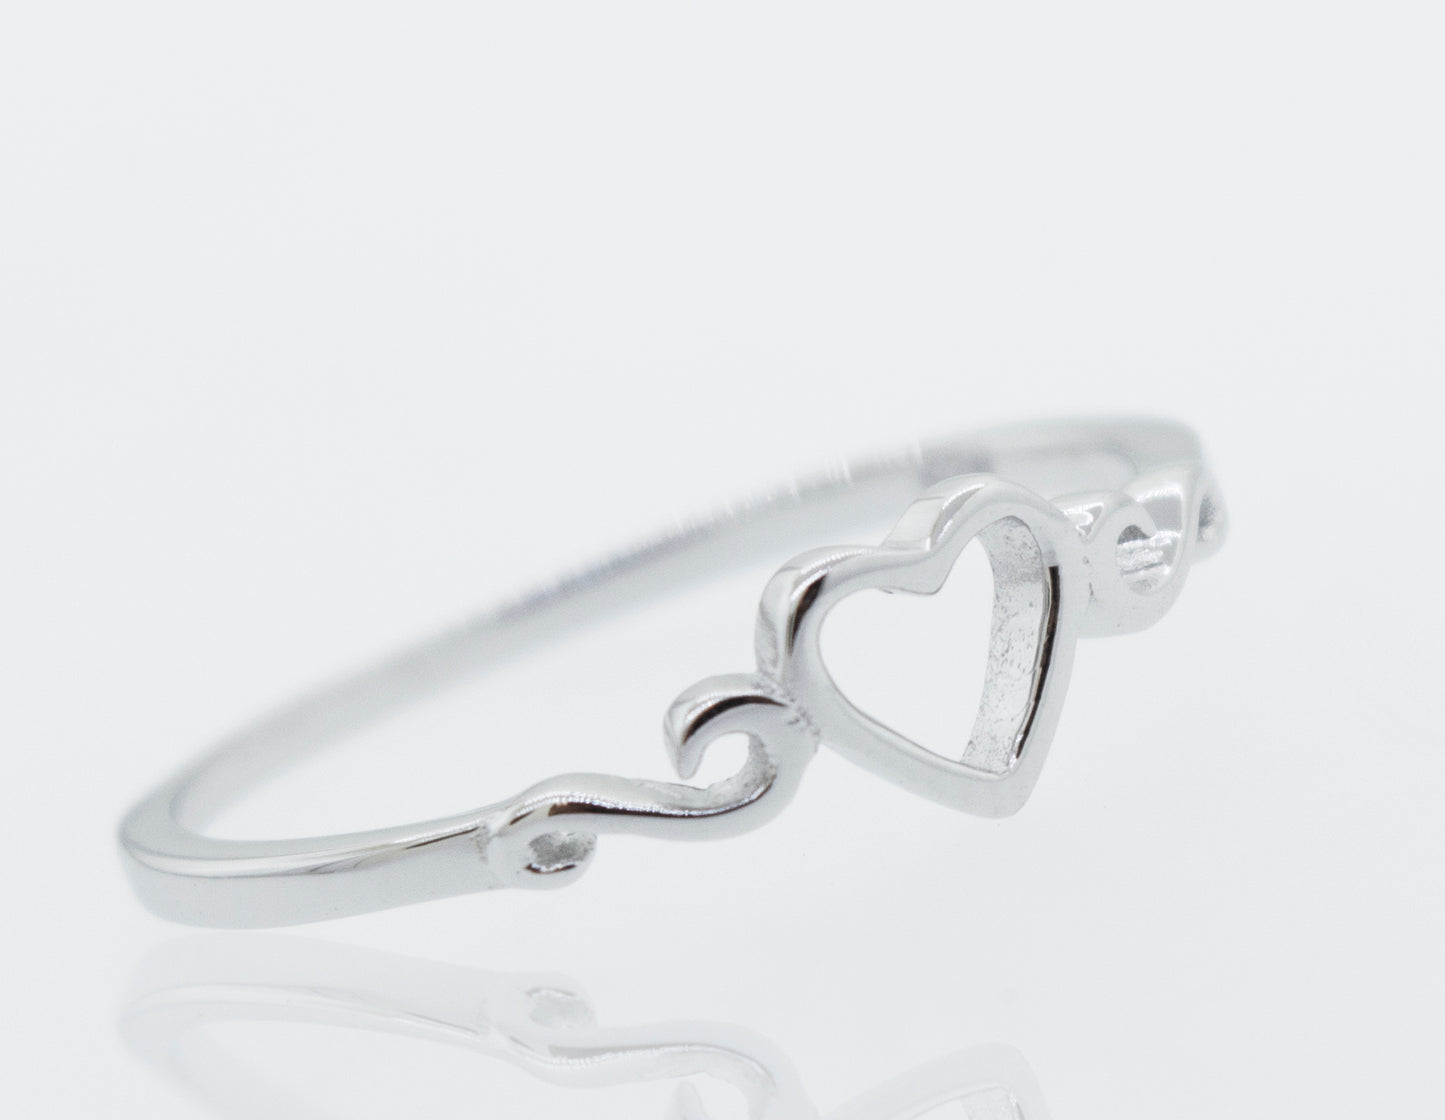 An engagement ring, named the Simple Open Heart Ring, crafted from sterling silver, featuring a heart-shaped design.